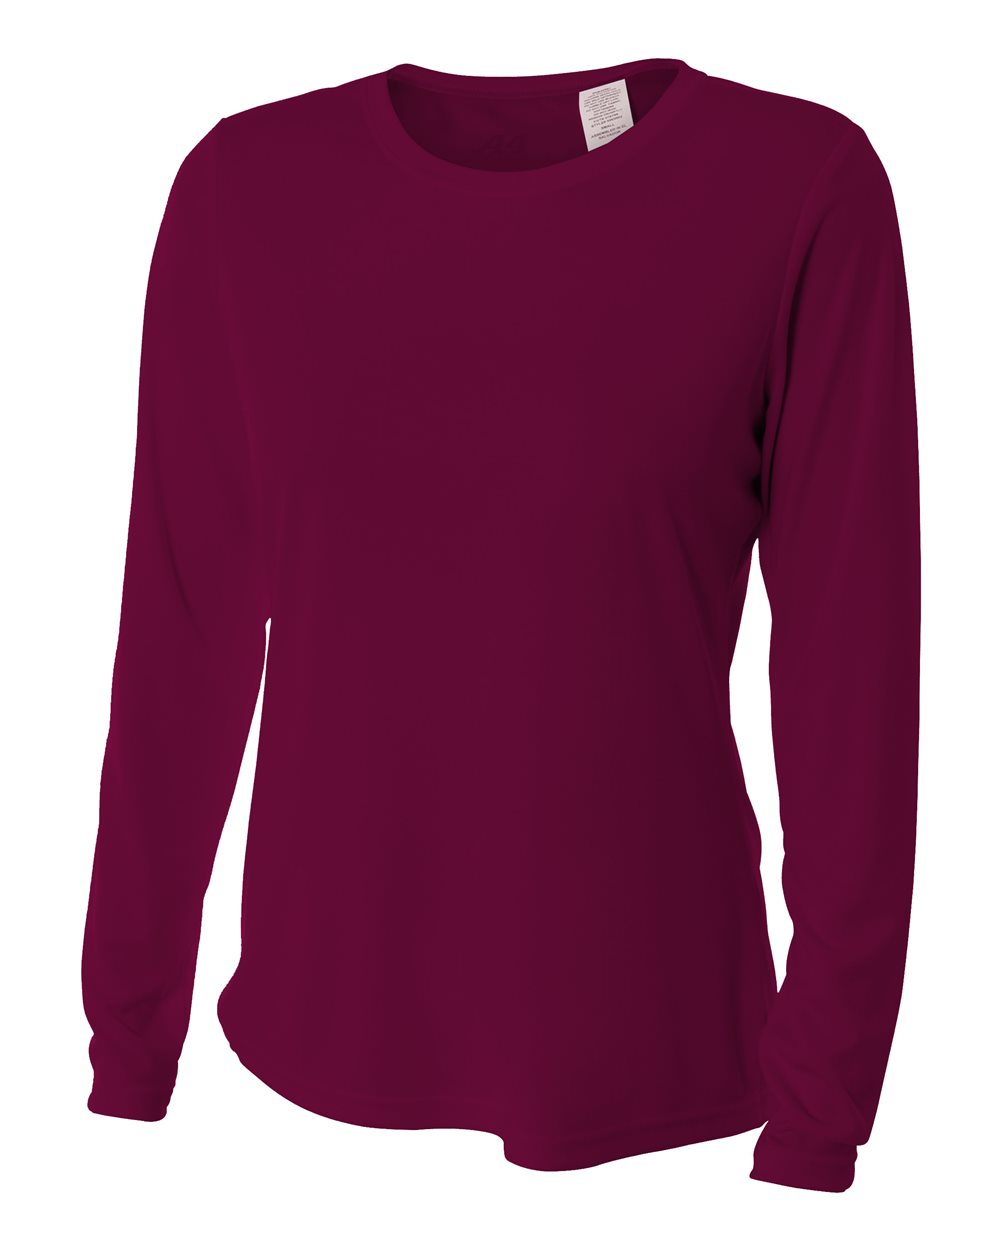 A4® NW3002 Women's Long Sleeve Cooling Performance Crew